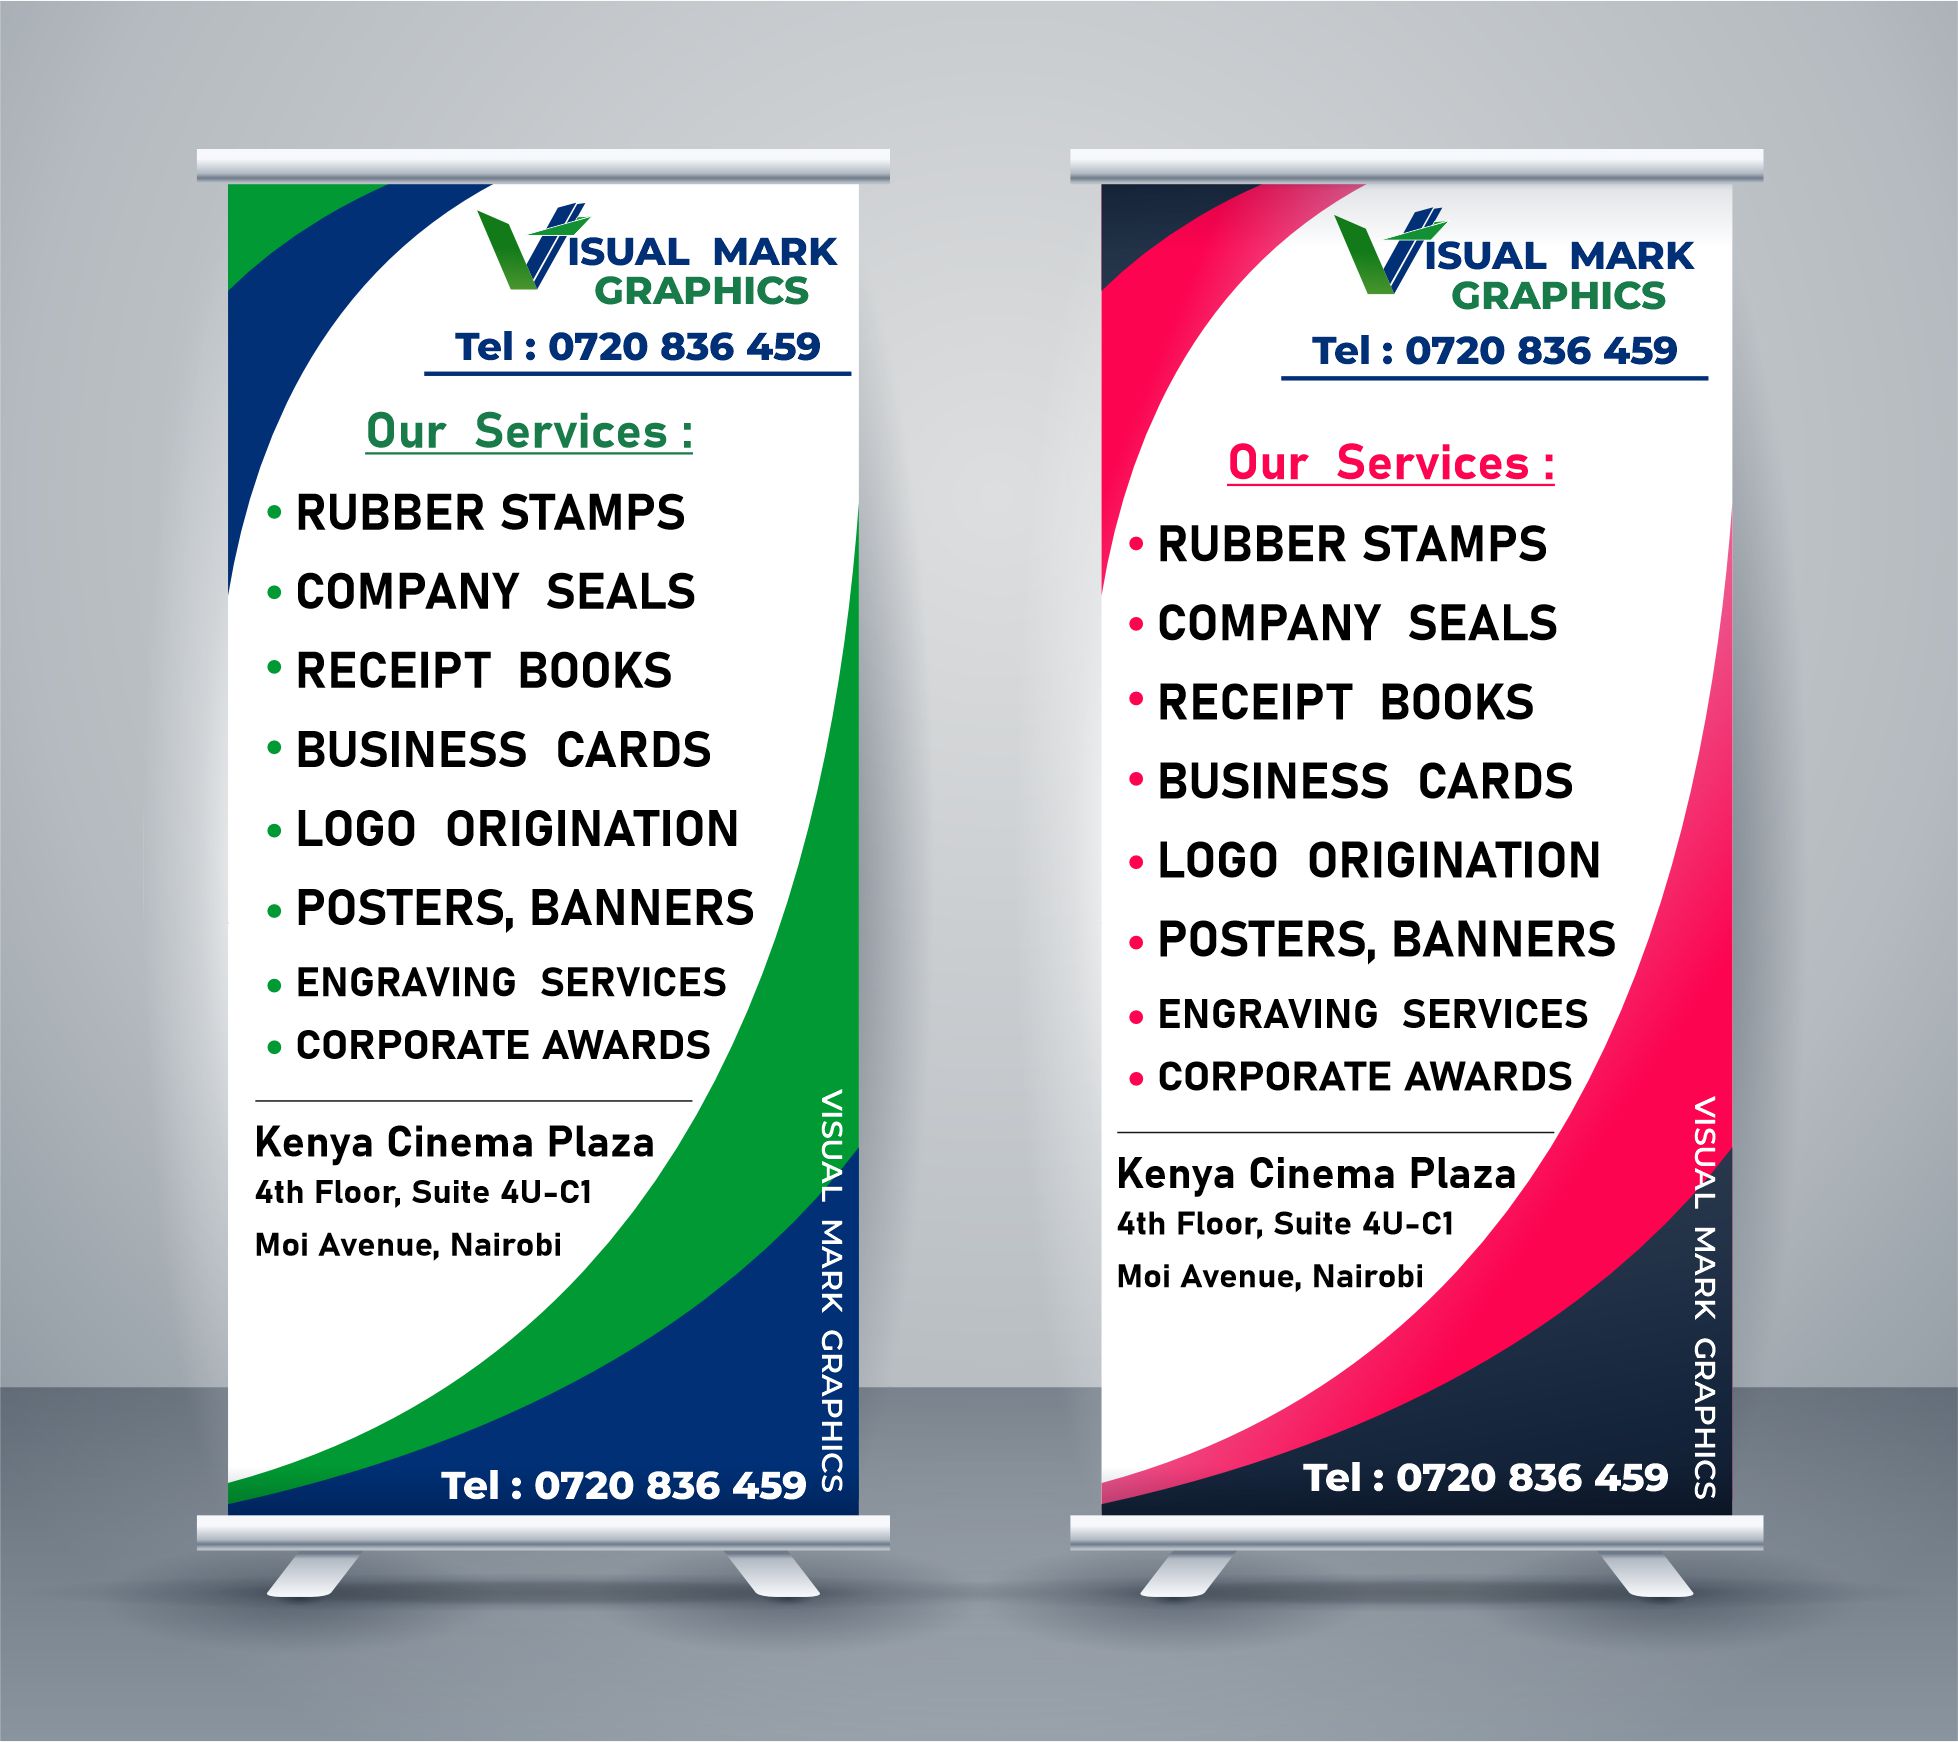 Wasp Roll-up 60 x 200 cm Rolled Advertising Stand With a Printout